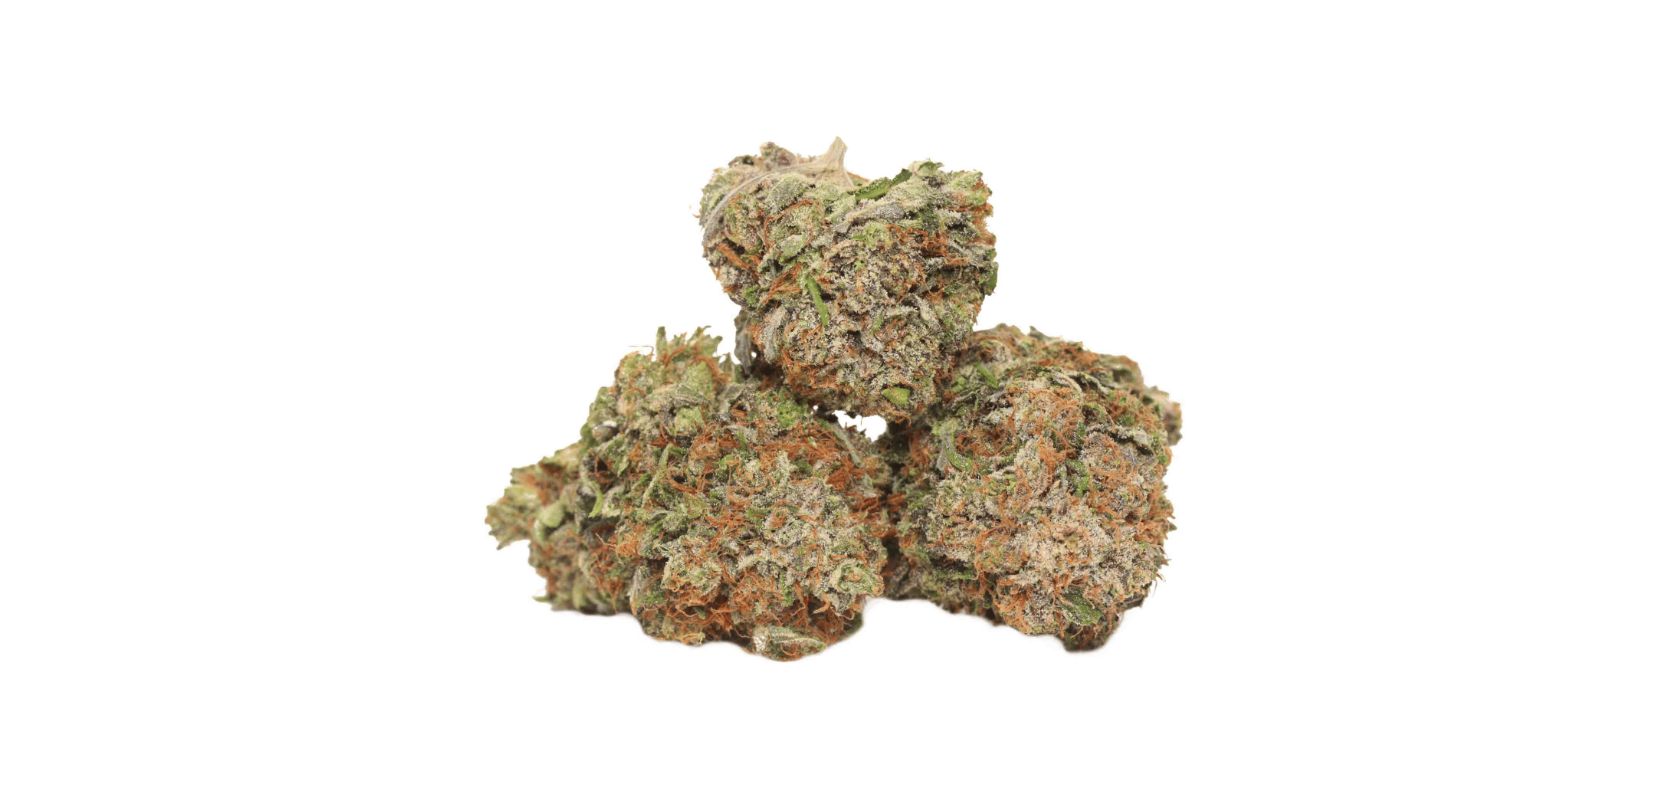 Buy weed online and try one of the rarest and most psychedelic strains in the world! Give the Death Bubba weed a go and find out why it’s addictive.